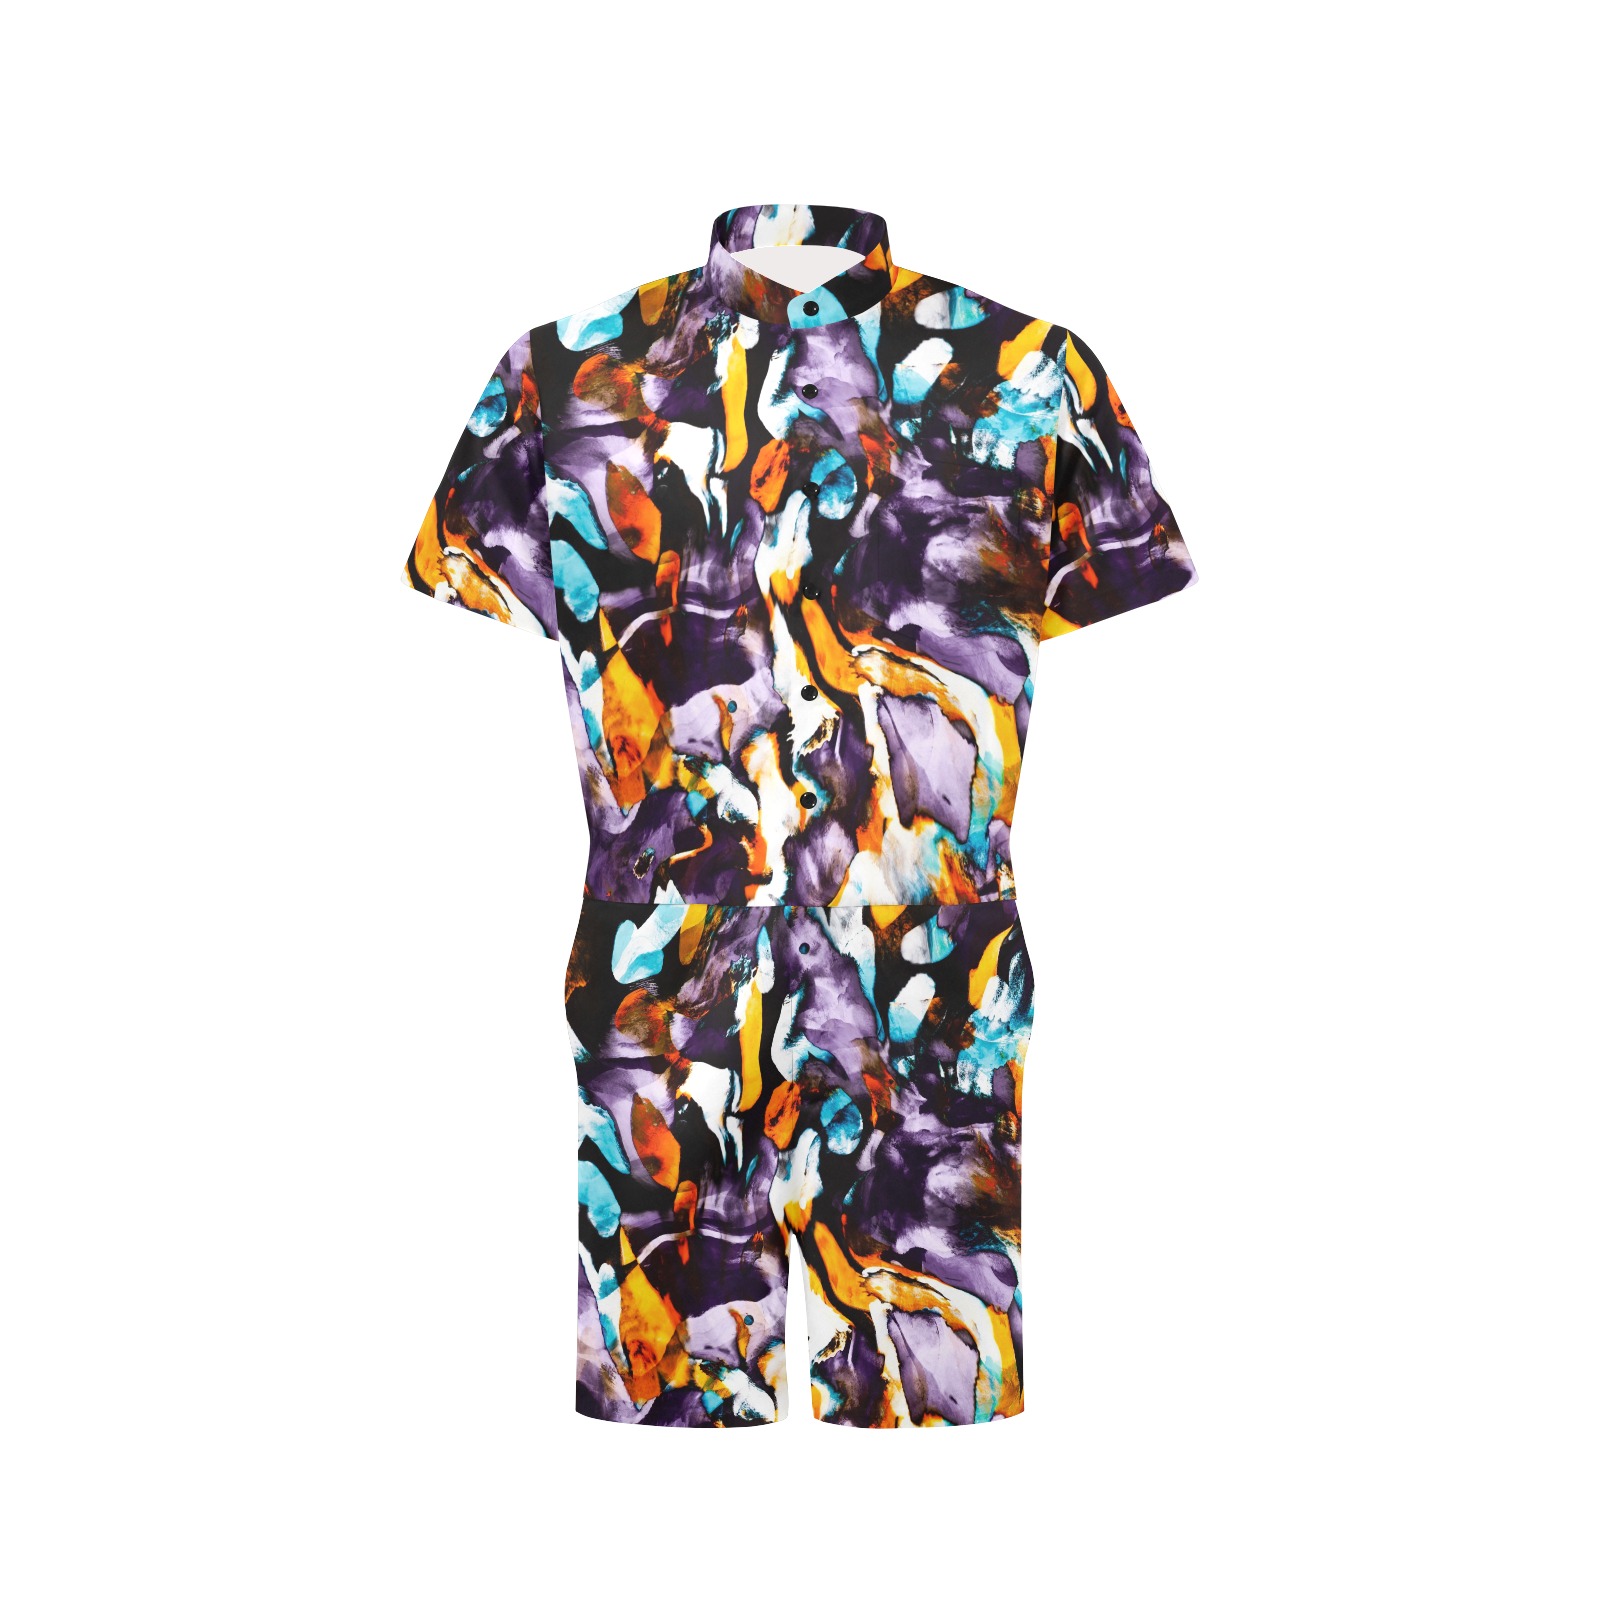 Colorful dark brushes abstract Men's Short Sleeve Jumpsuit